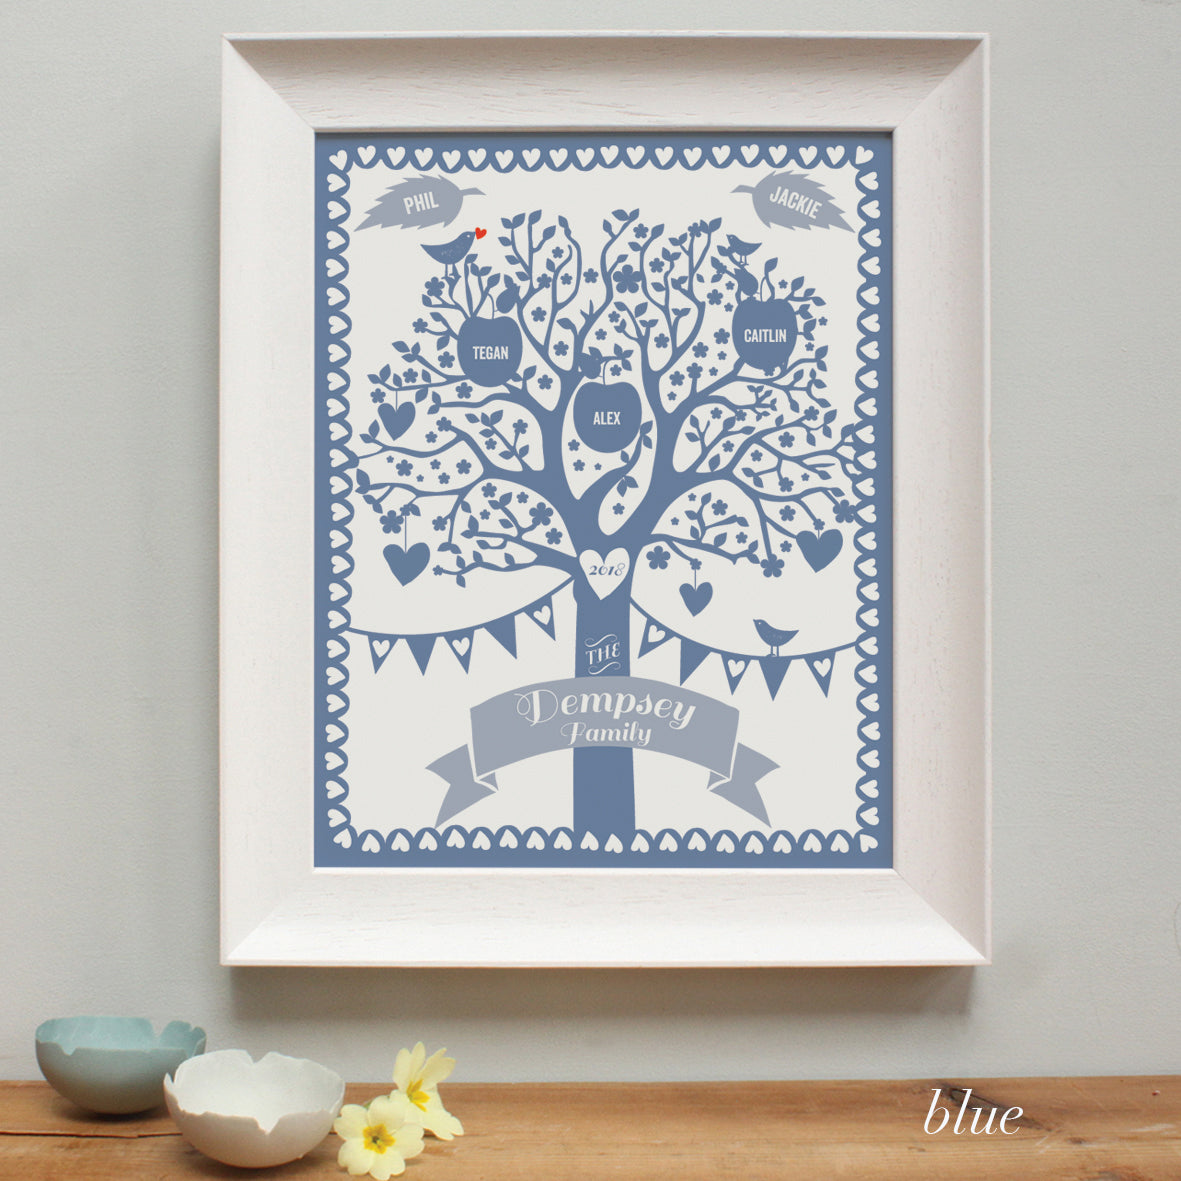 blue illustration of a family tree in a white frame